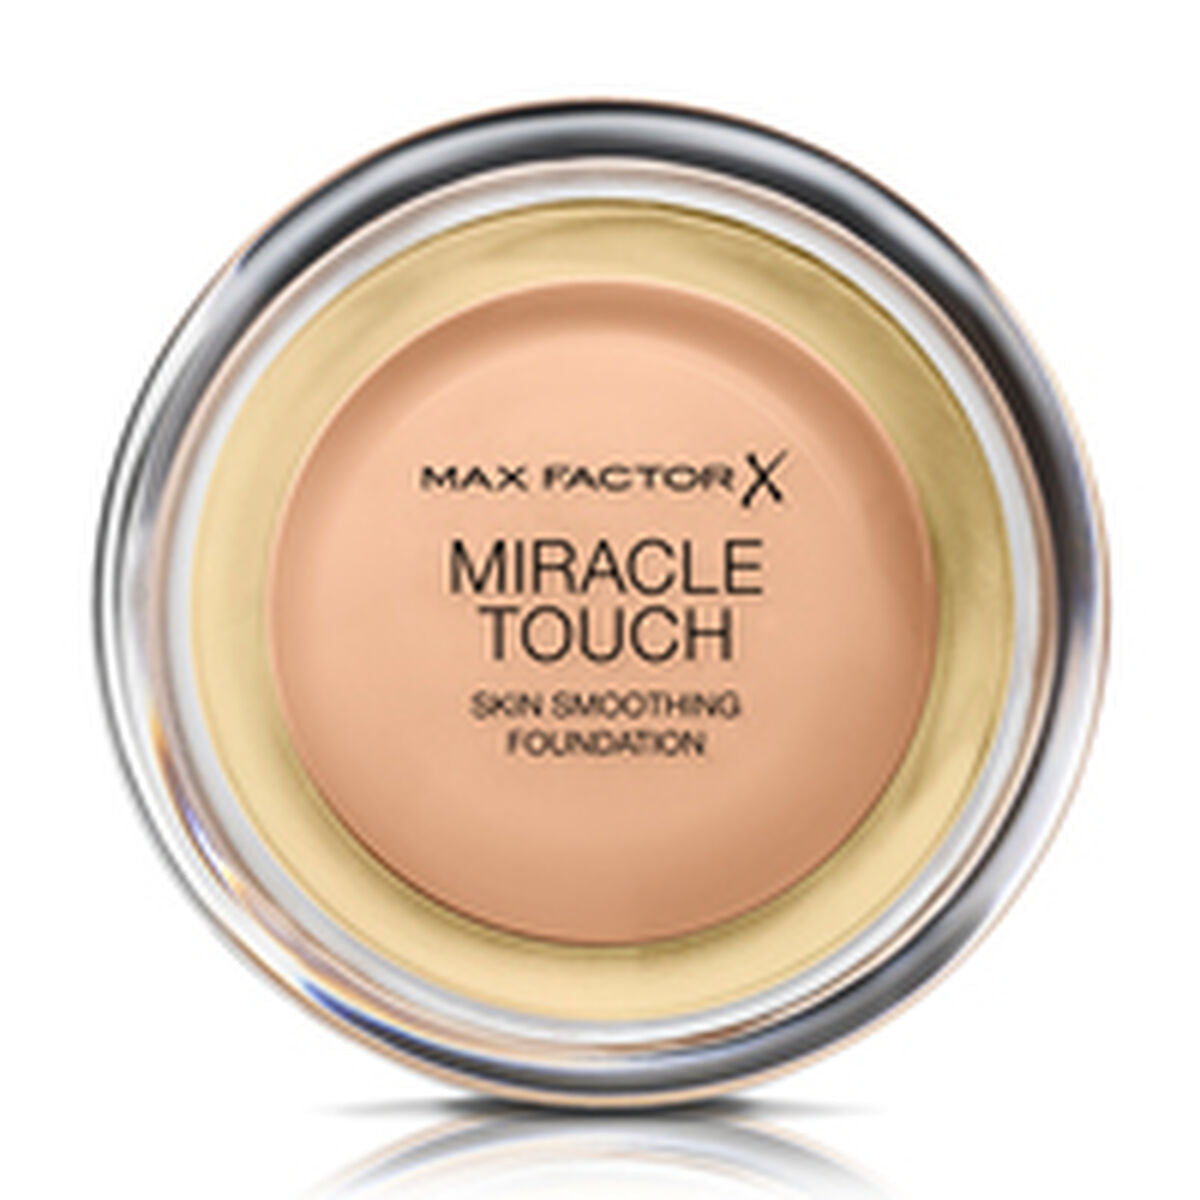 Liquid Make Up Base Miracle Touch Max Factor 99240012686 Spf 30